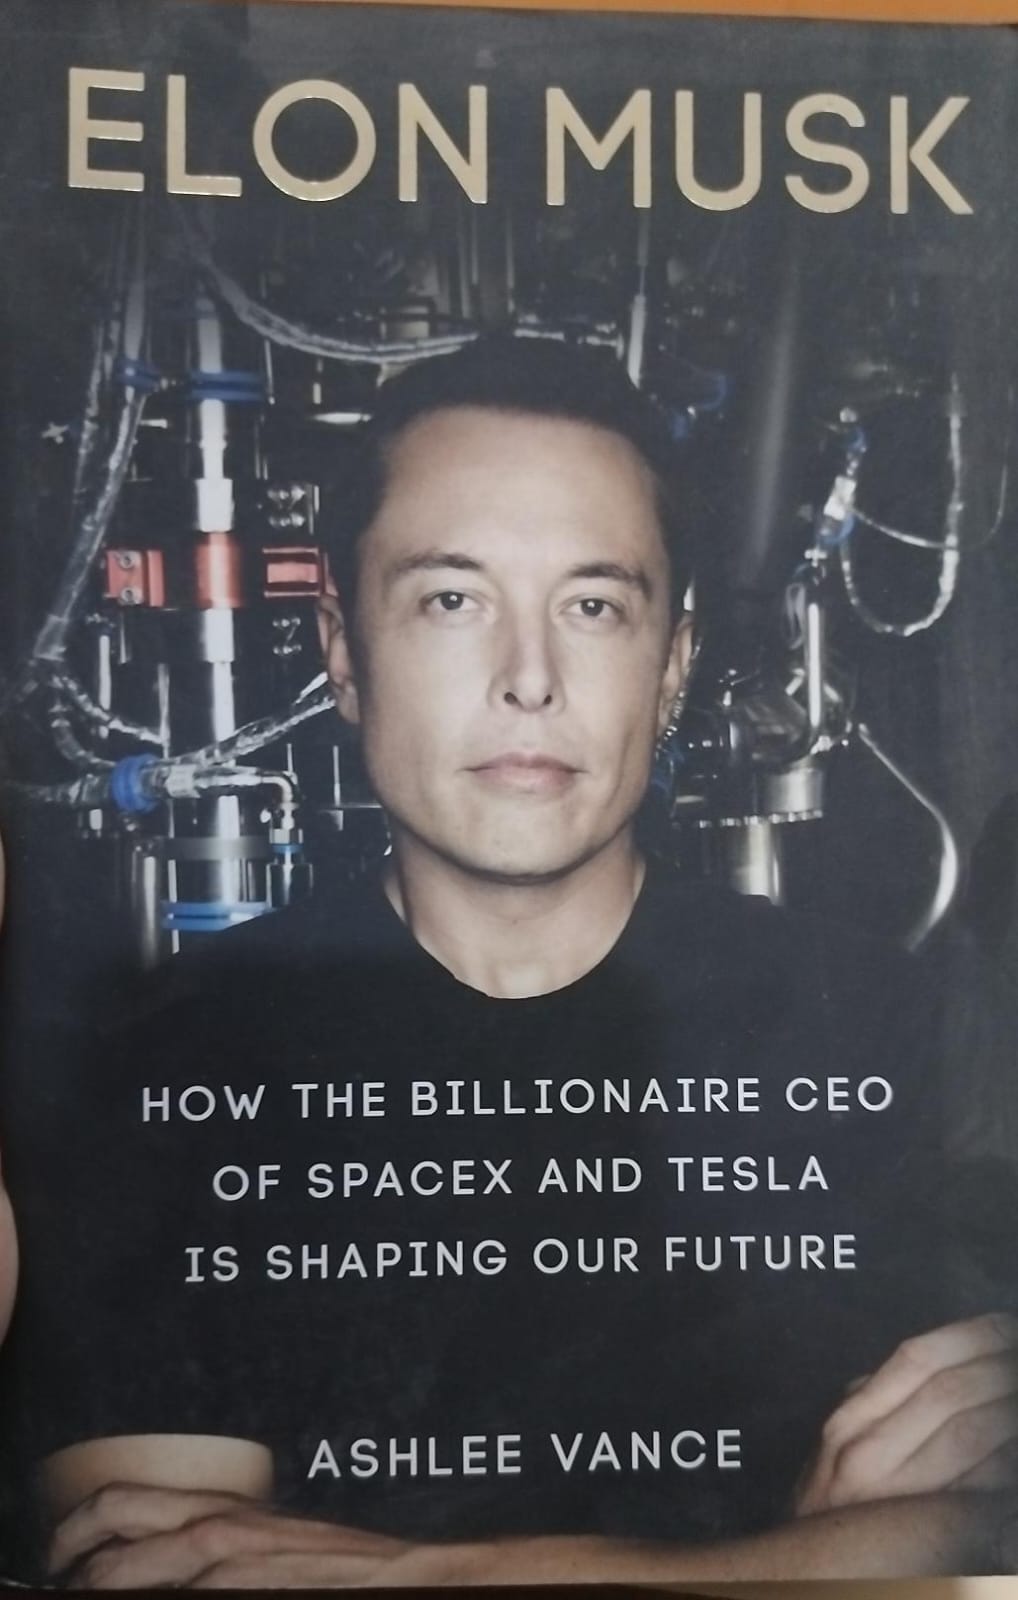 (Used) Elon Musk: How The Billionaire Ceo Of Spacex And Tesla Is Shaping Our Future (paperback)